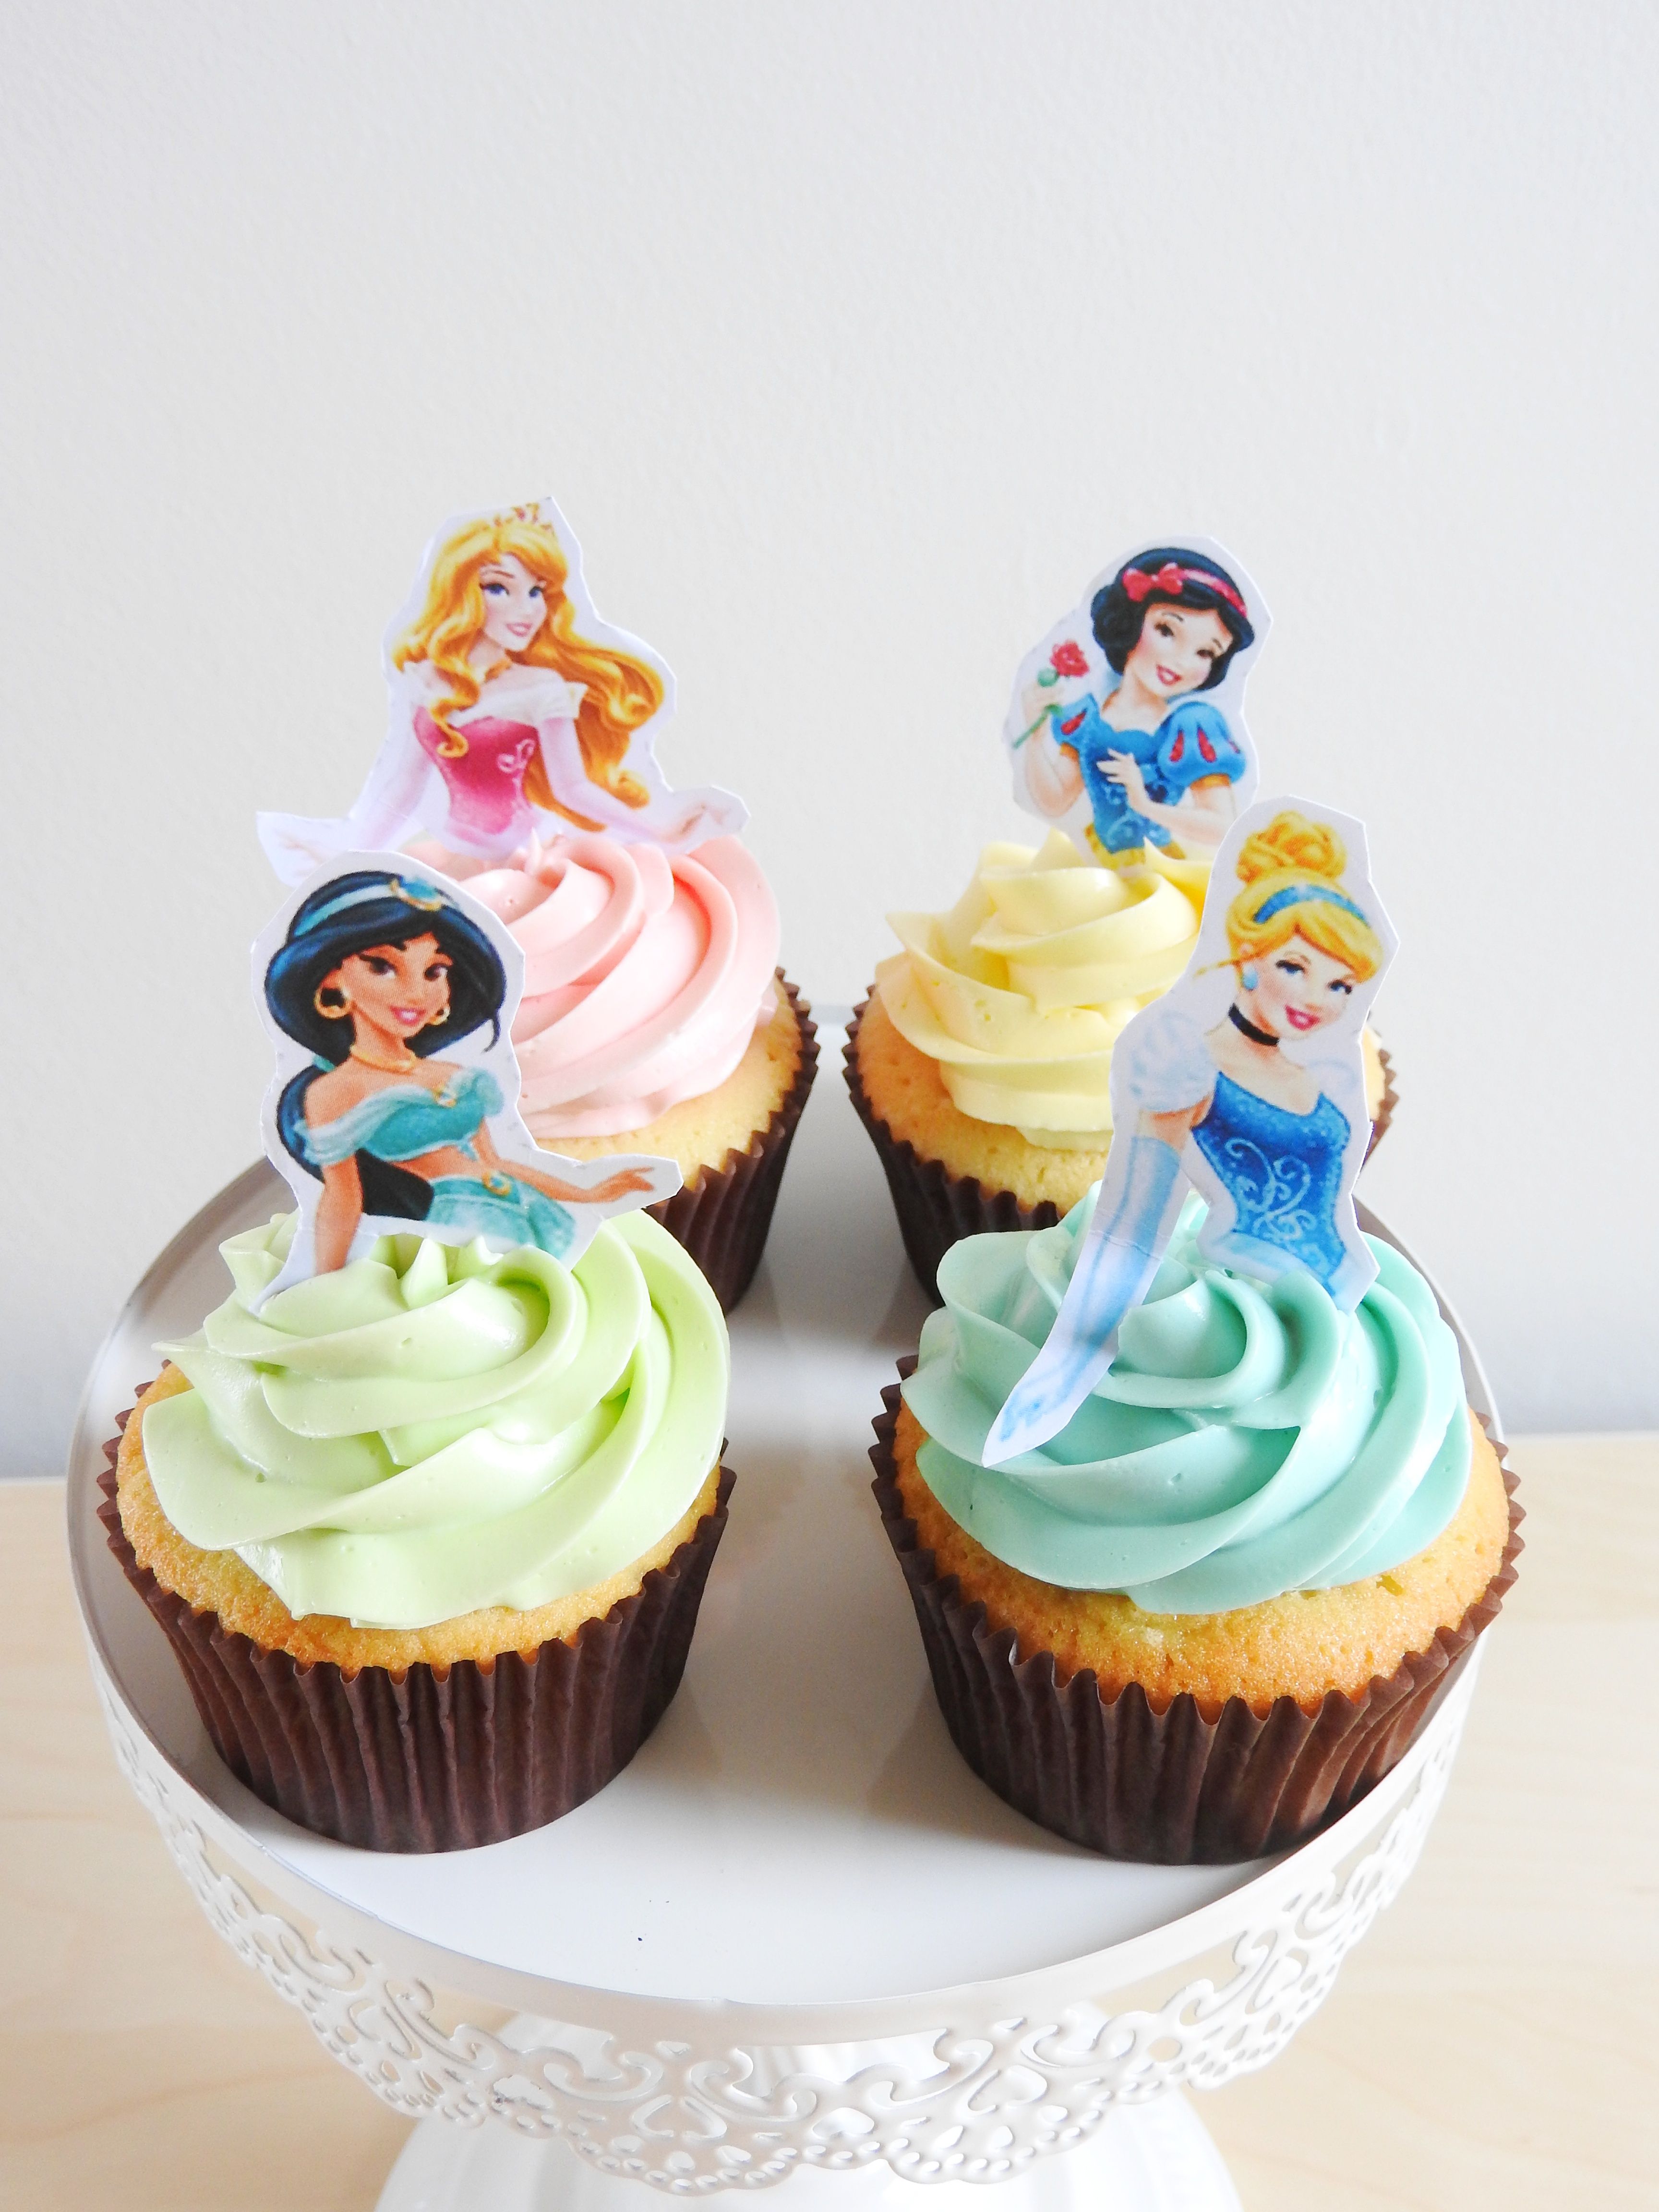 My #disneyprincess themed... - Delicious cakes by Rohini | Facebook